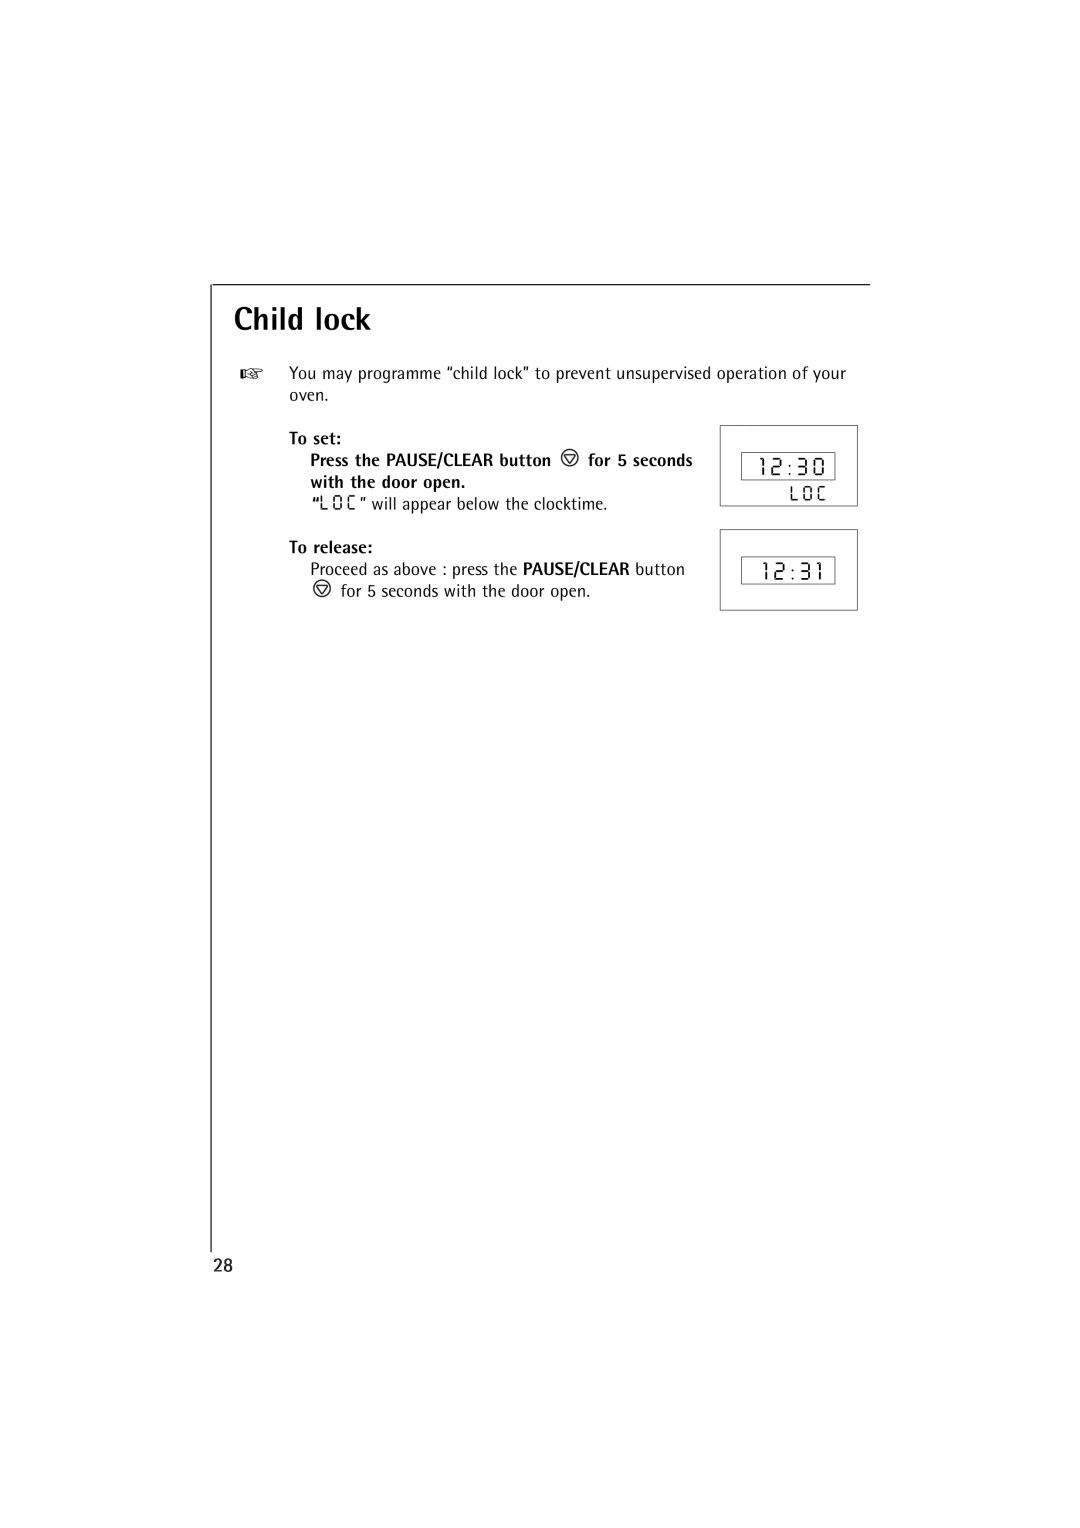 AEG MCC 663 Child lock, To set Press the PAUSE/CLEAR button for 5 seconds with the door open, To release, L O C 